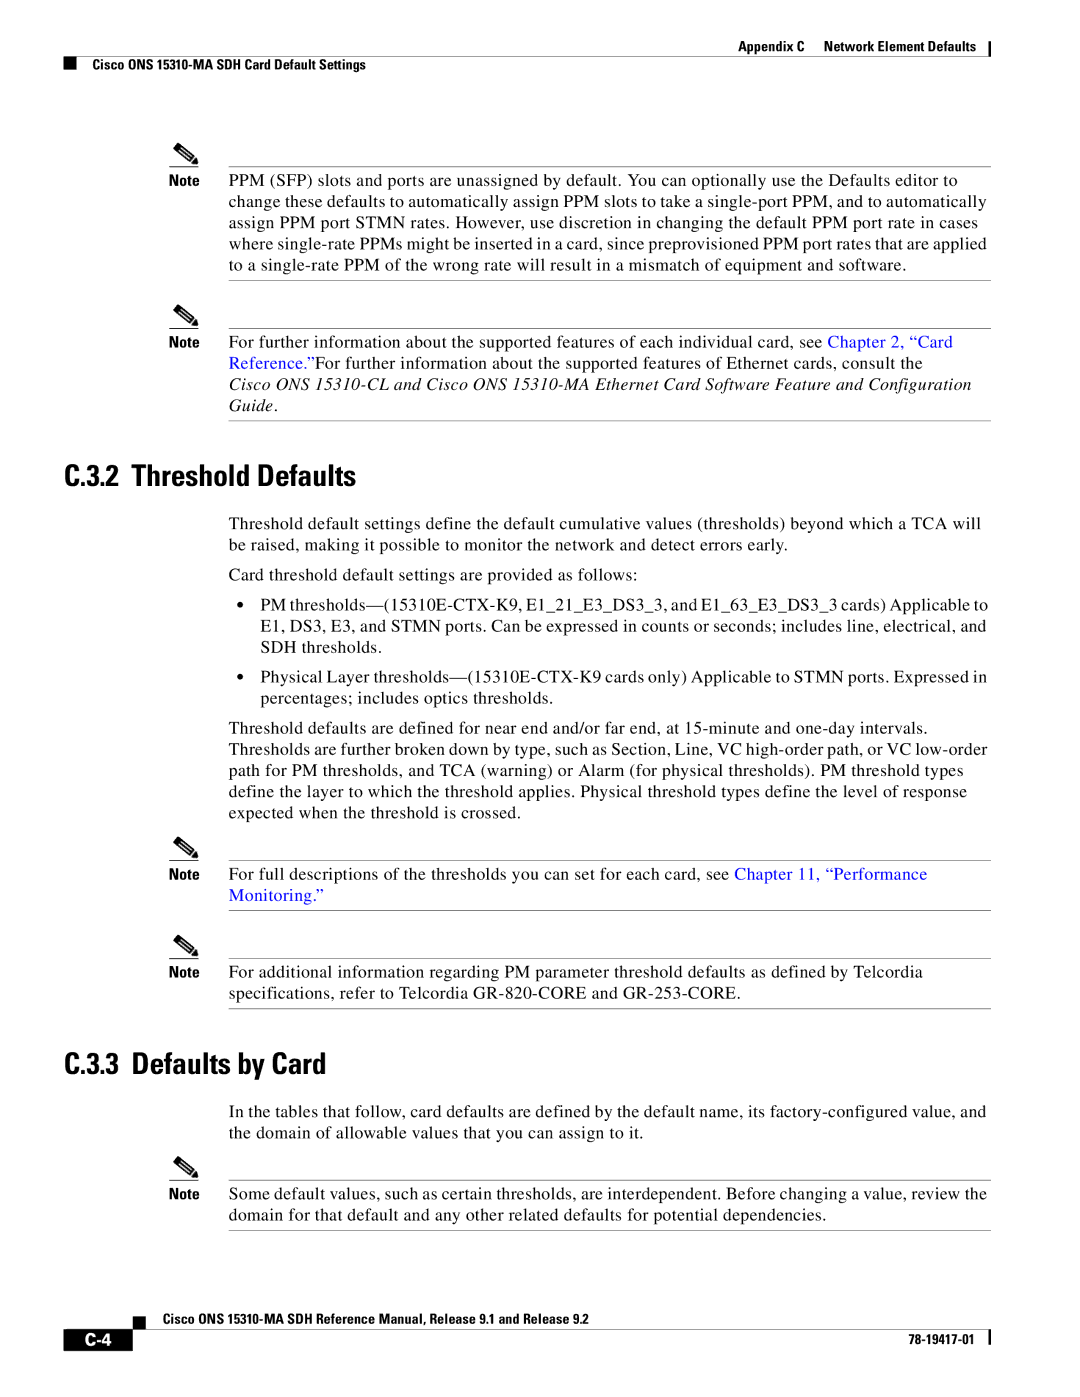 Cisco Systems 15310-MA manual Threshold Defaults, Defaults by Card 